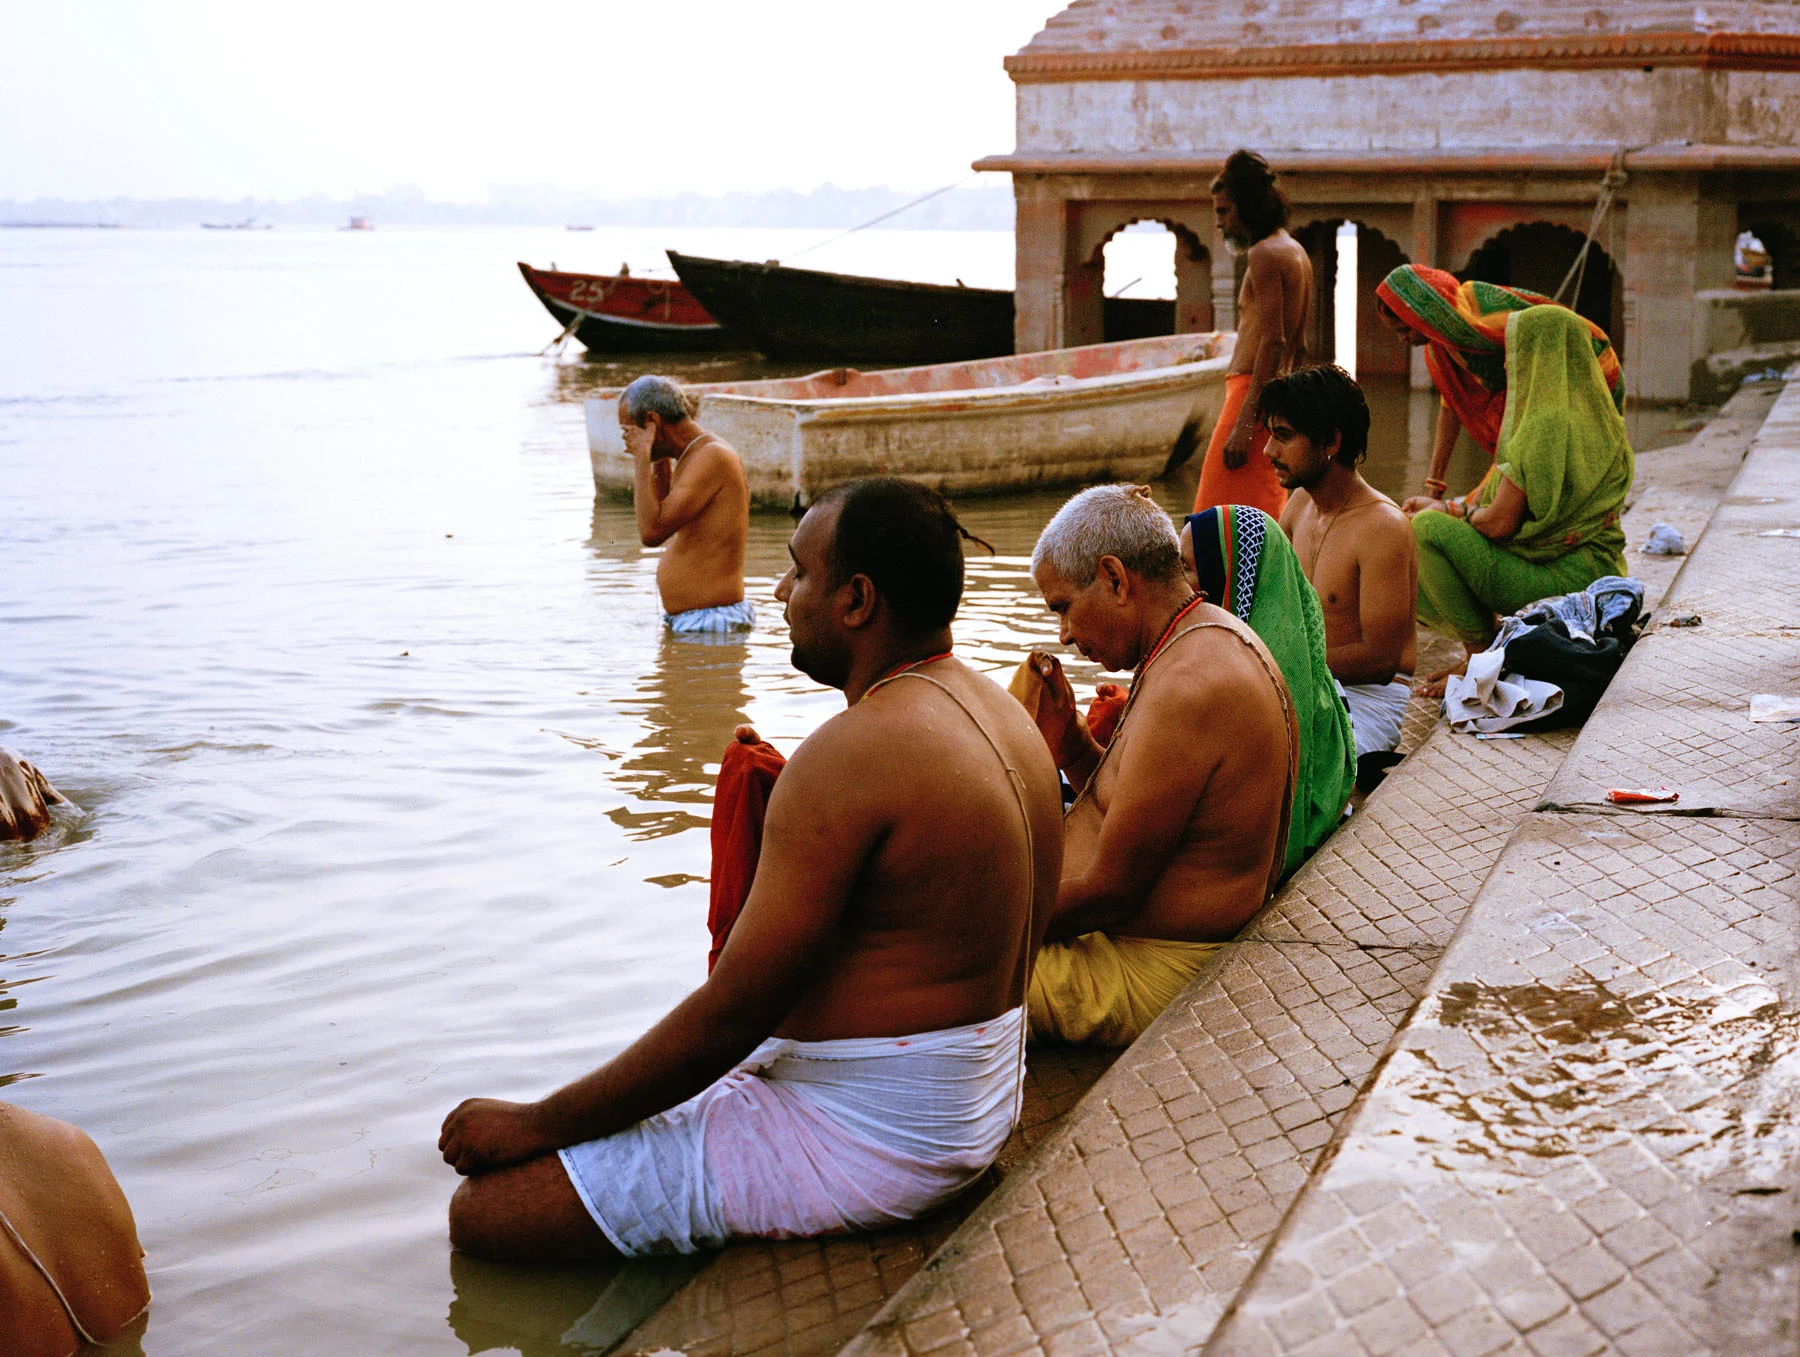 A photograph of a group of people sitting and meditating by the river Ganges, their lower halves submerged in the water. Boats are anchored by the river in the background. 